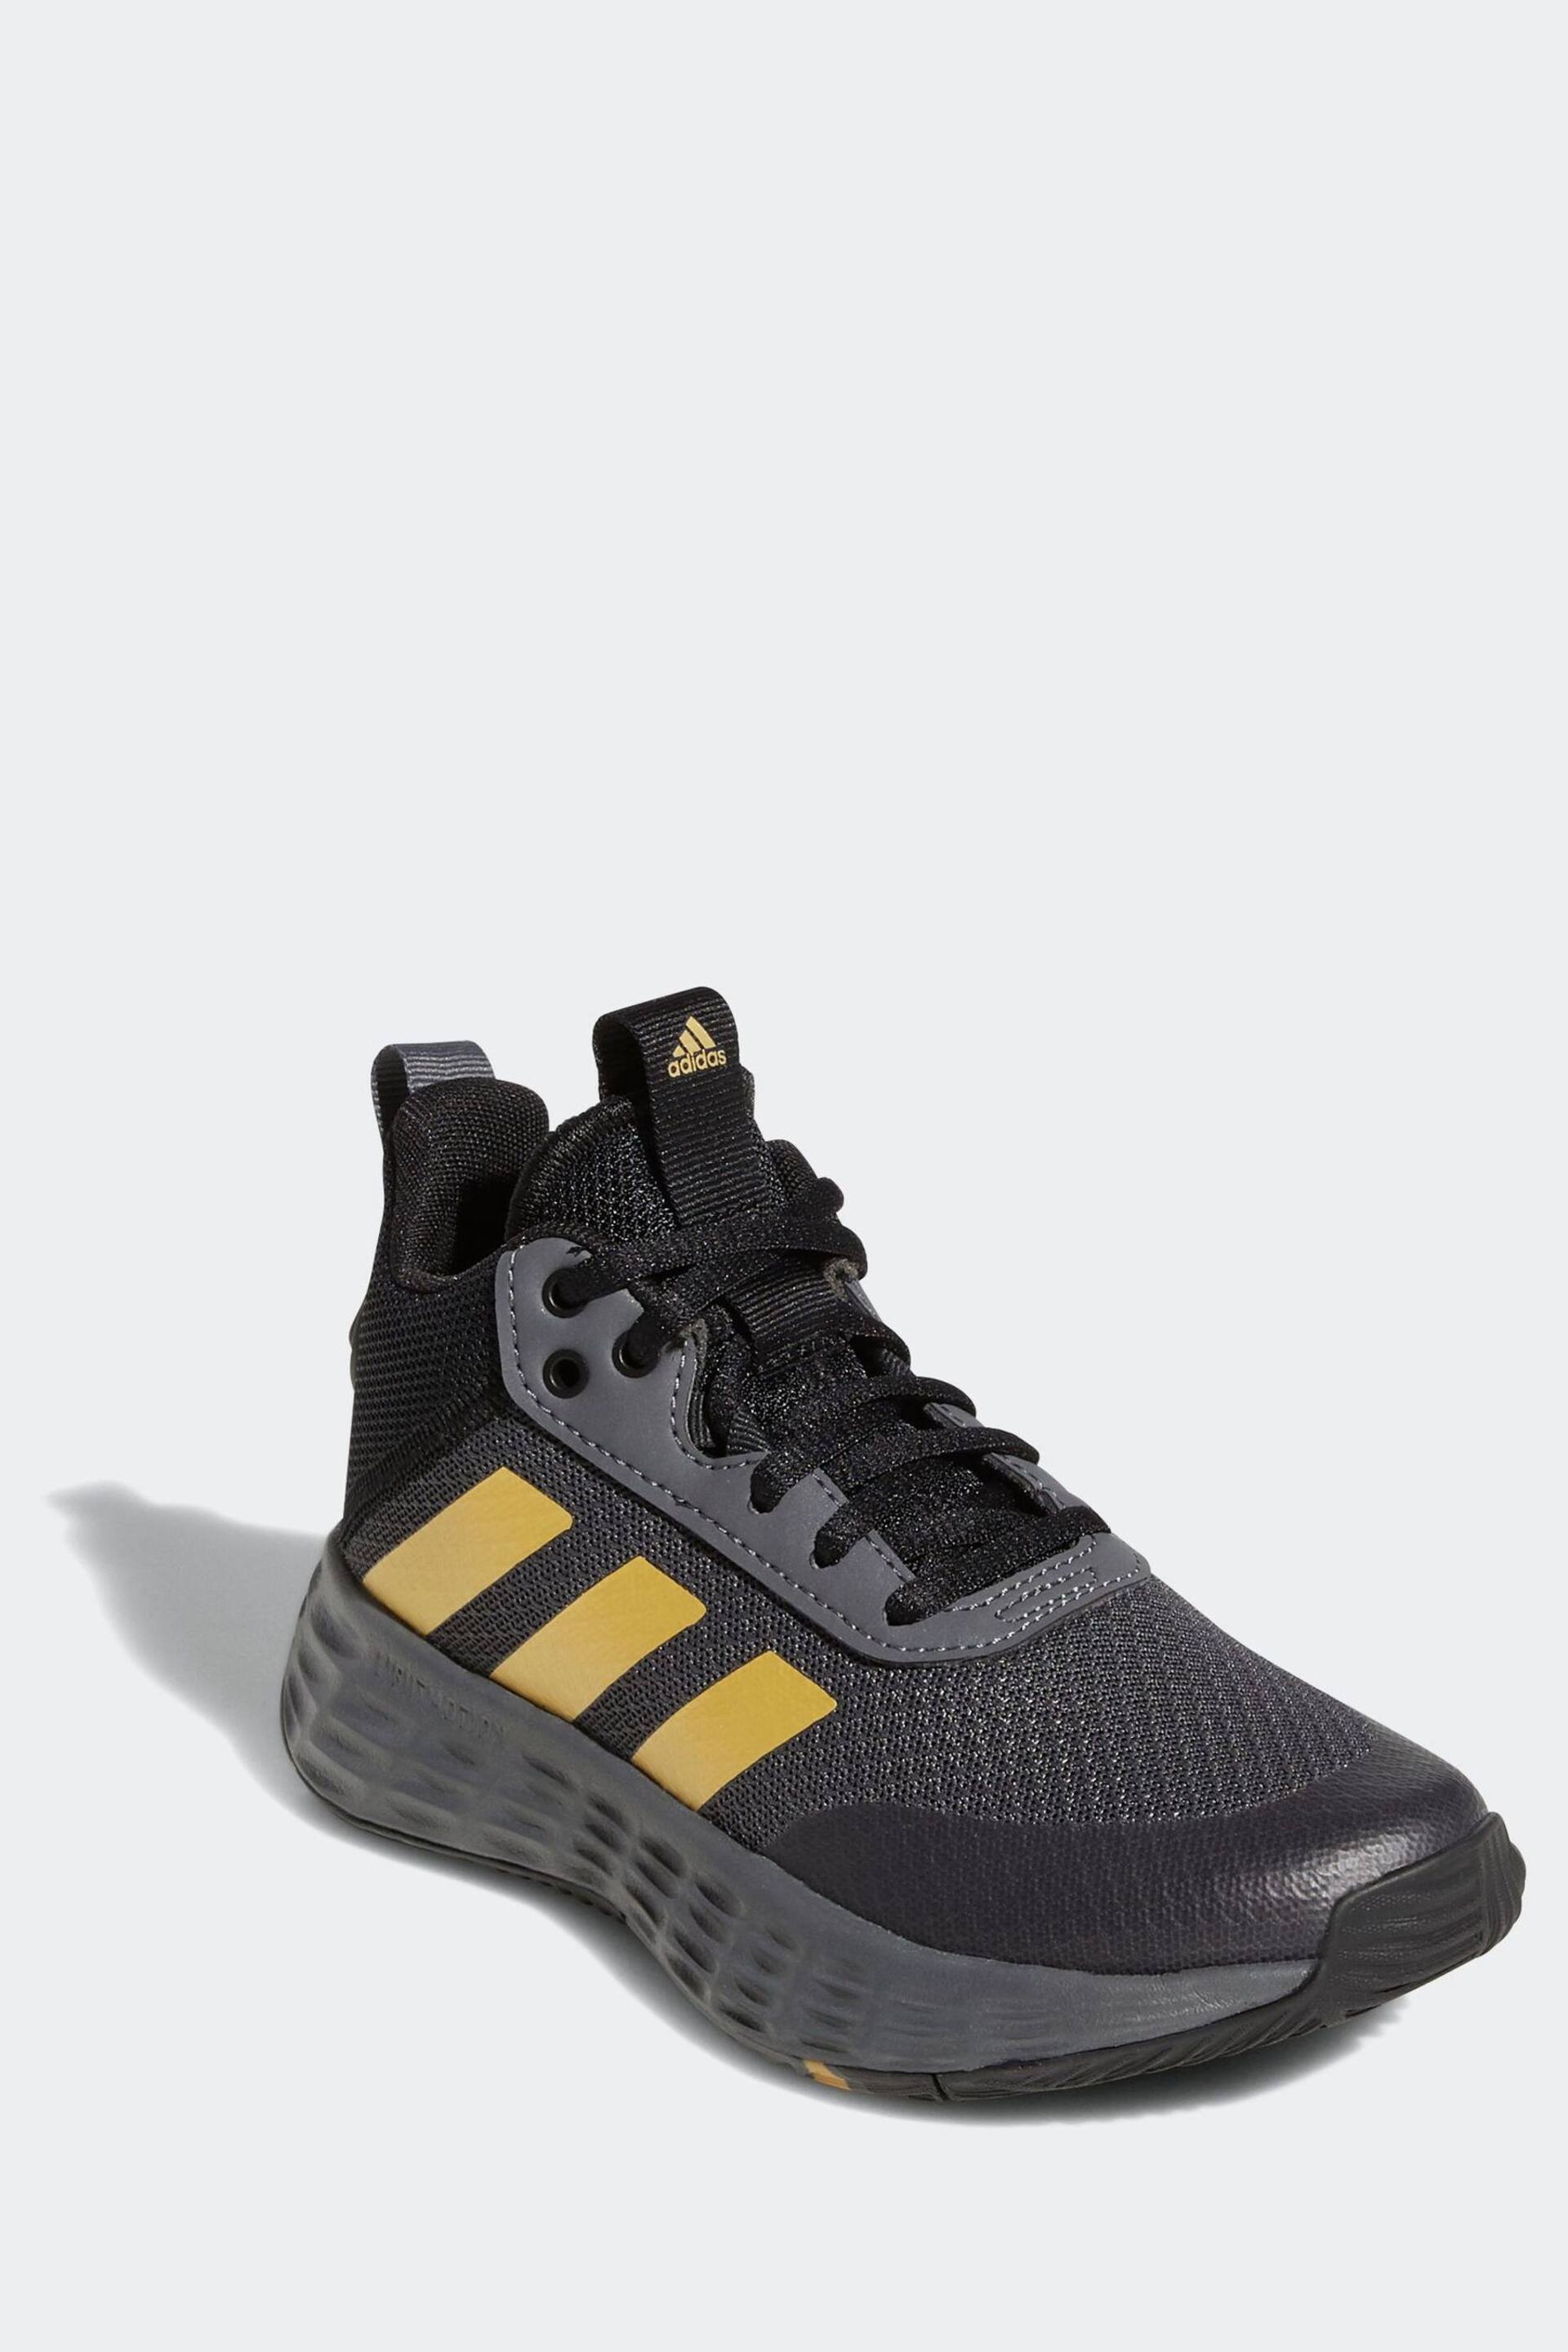 adidas Grey/Black Originals Ownthegame 2.0 Trainers - Image 3 of 6